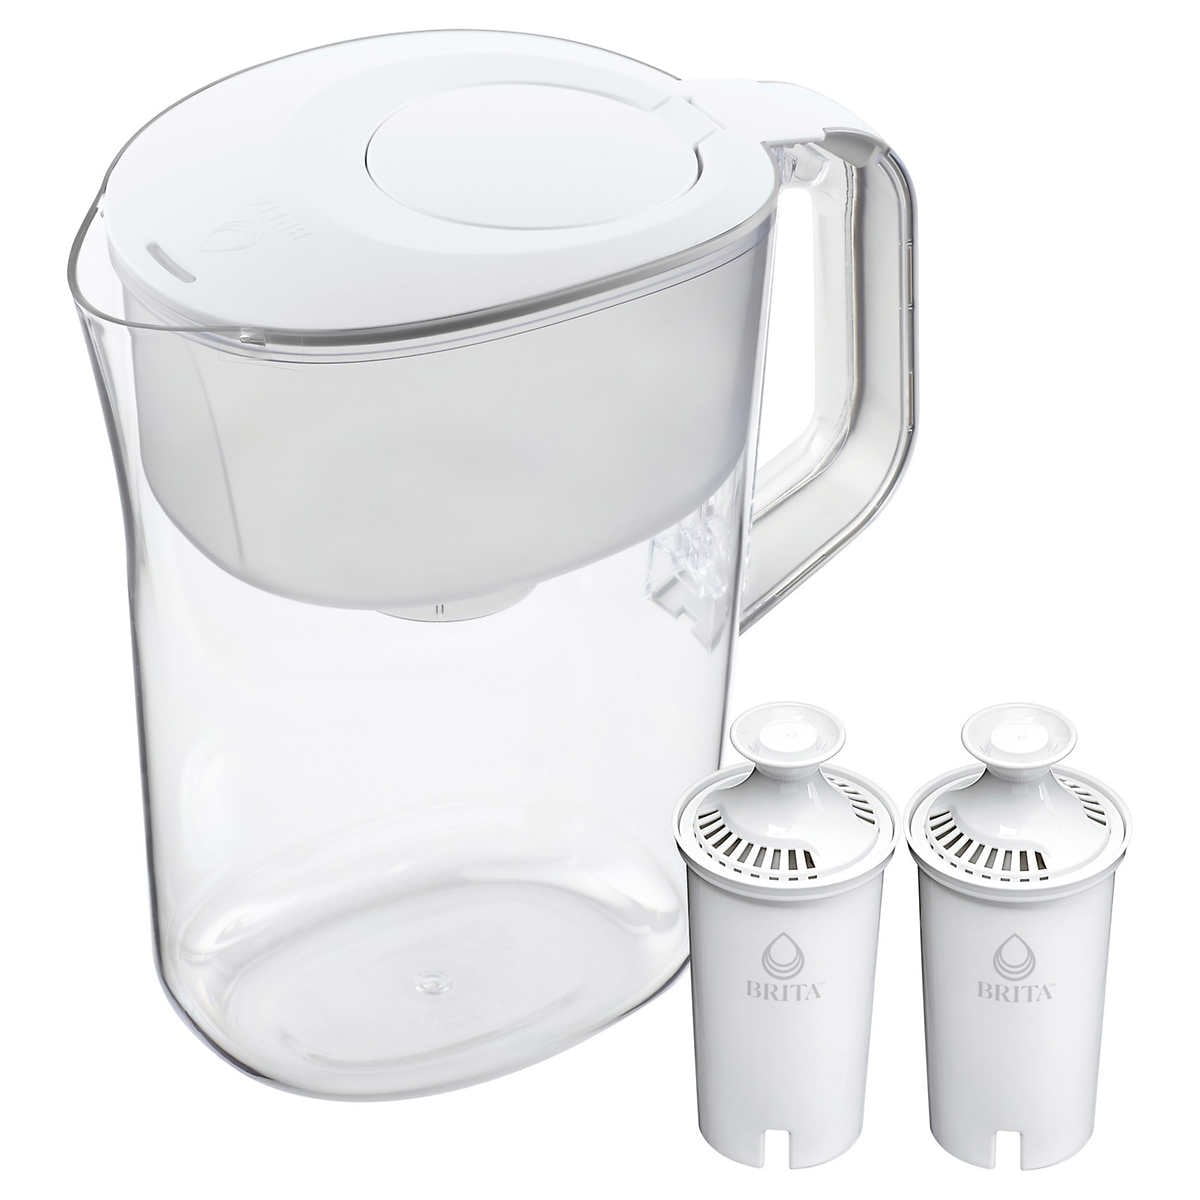 Brita Champlain Water Filter Pitcher, 10 Cup with 2 Filters - Walmart.com